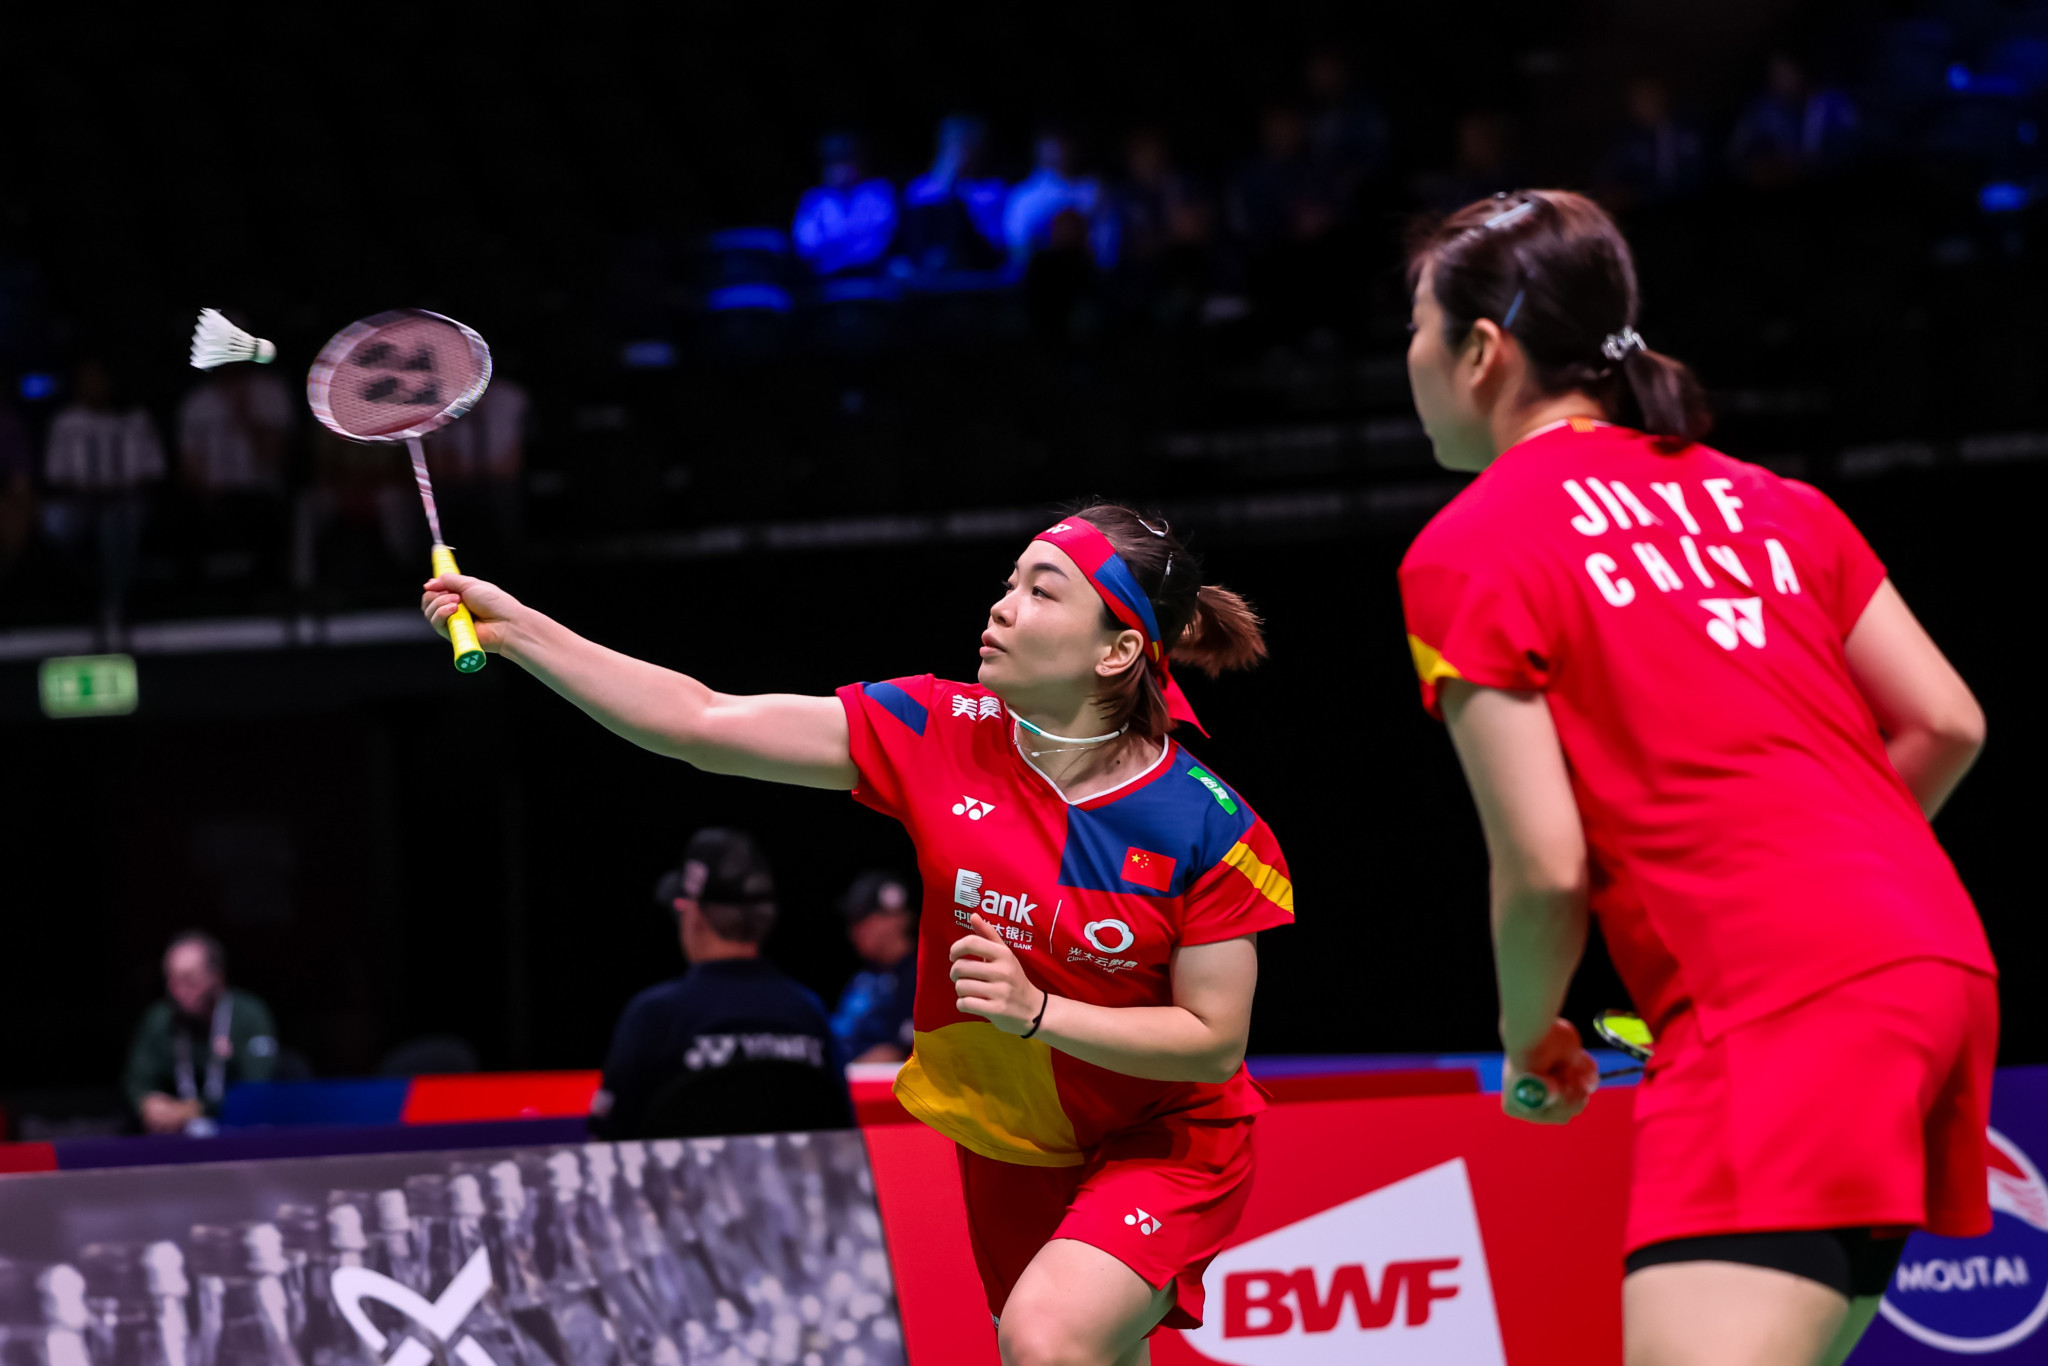 World number one women's doubles pairing Chen Qingchen and Jia Yifan of China eased through to the next stage ©Badmintonphoto